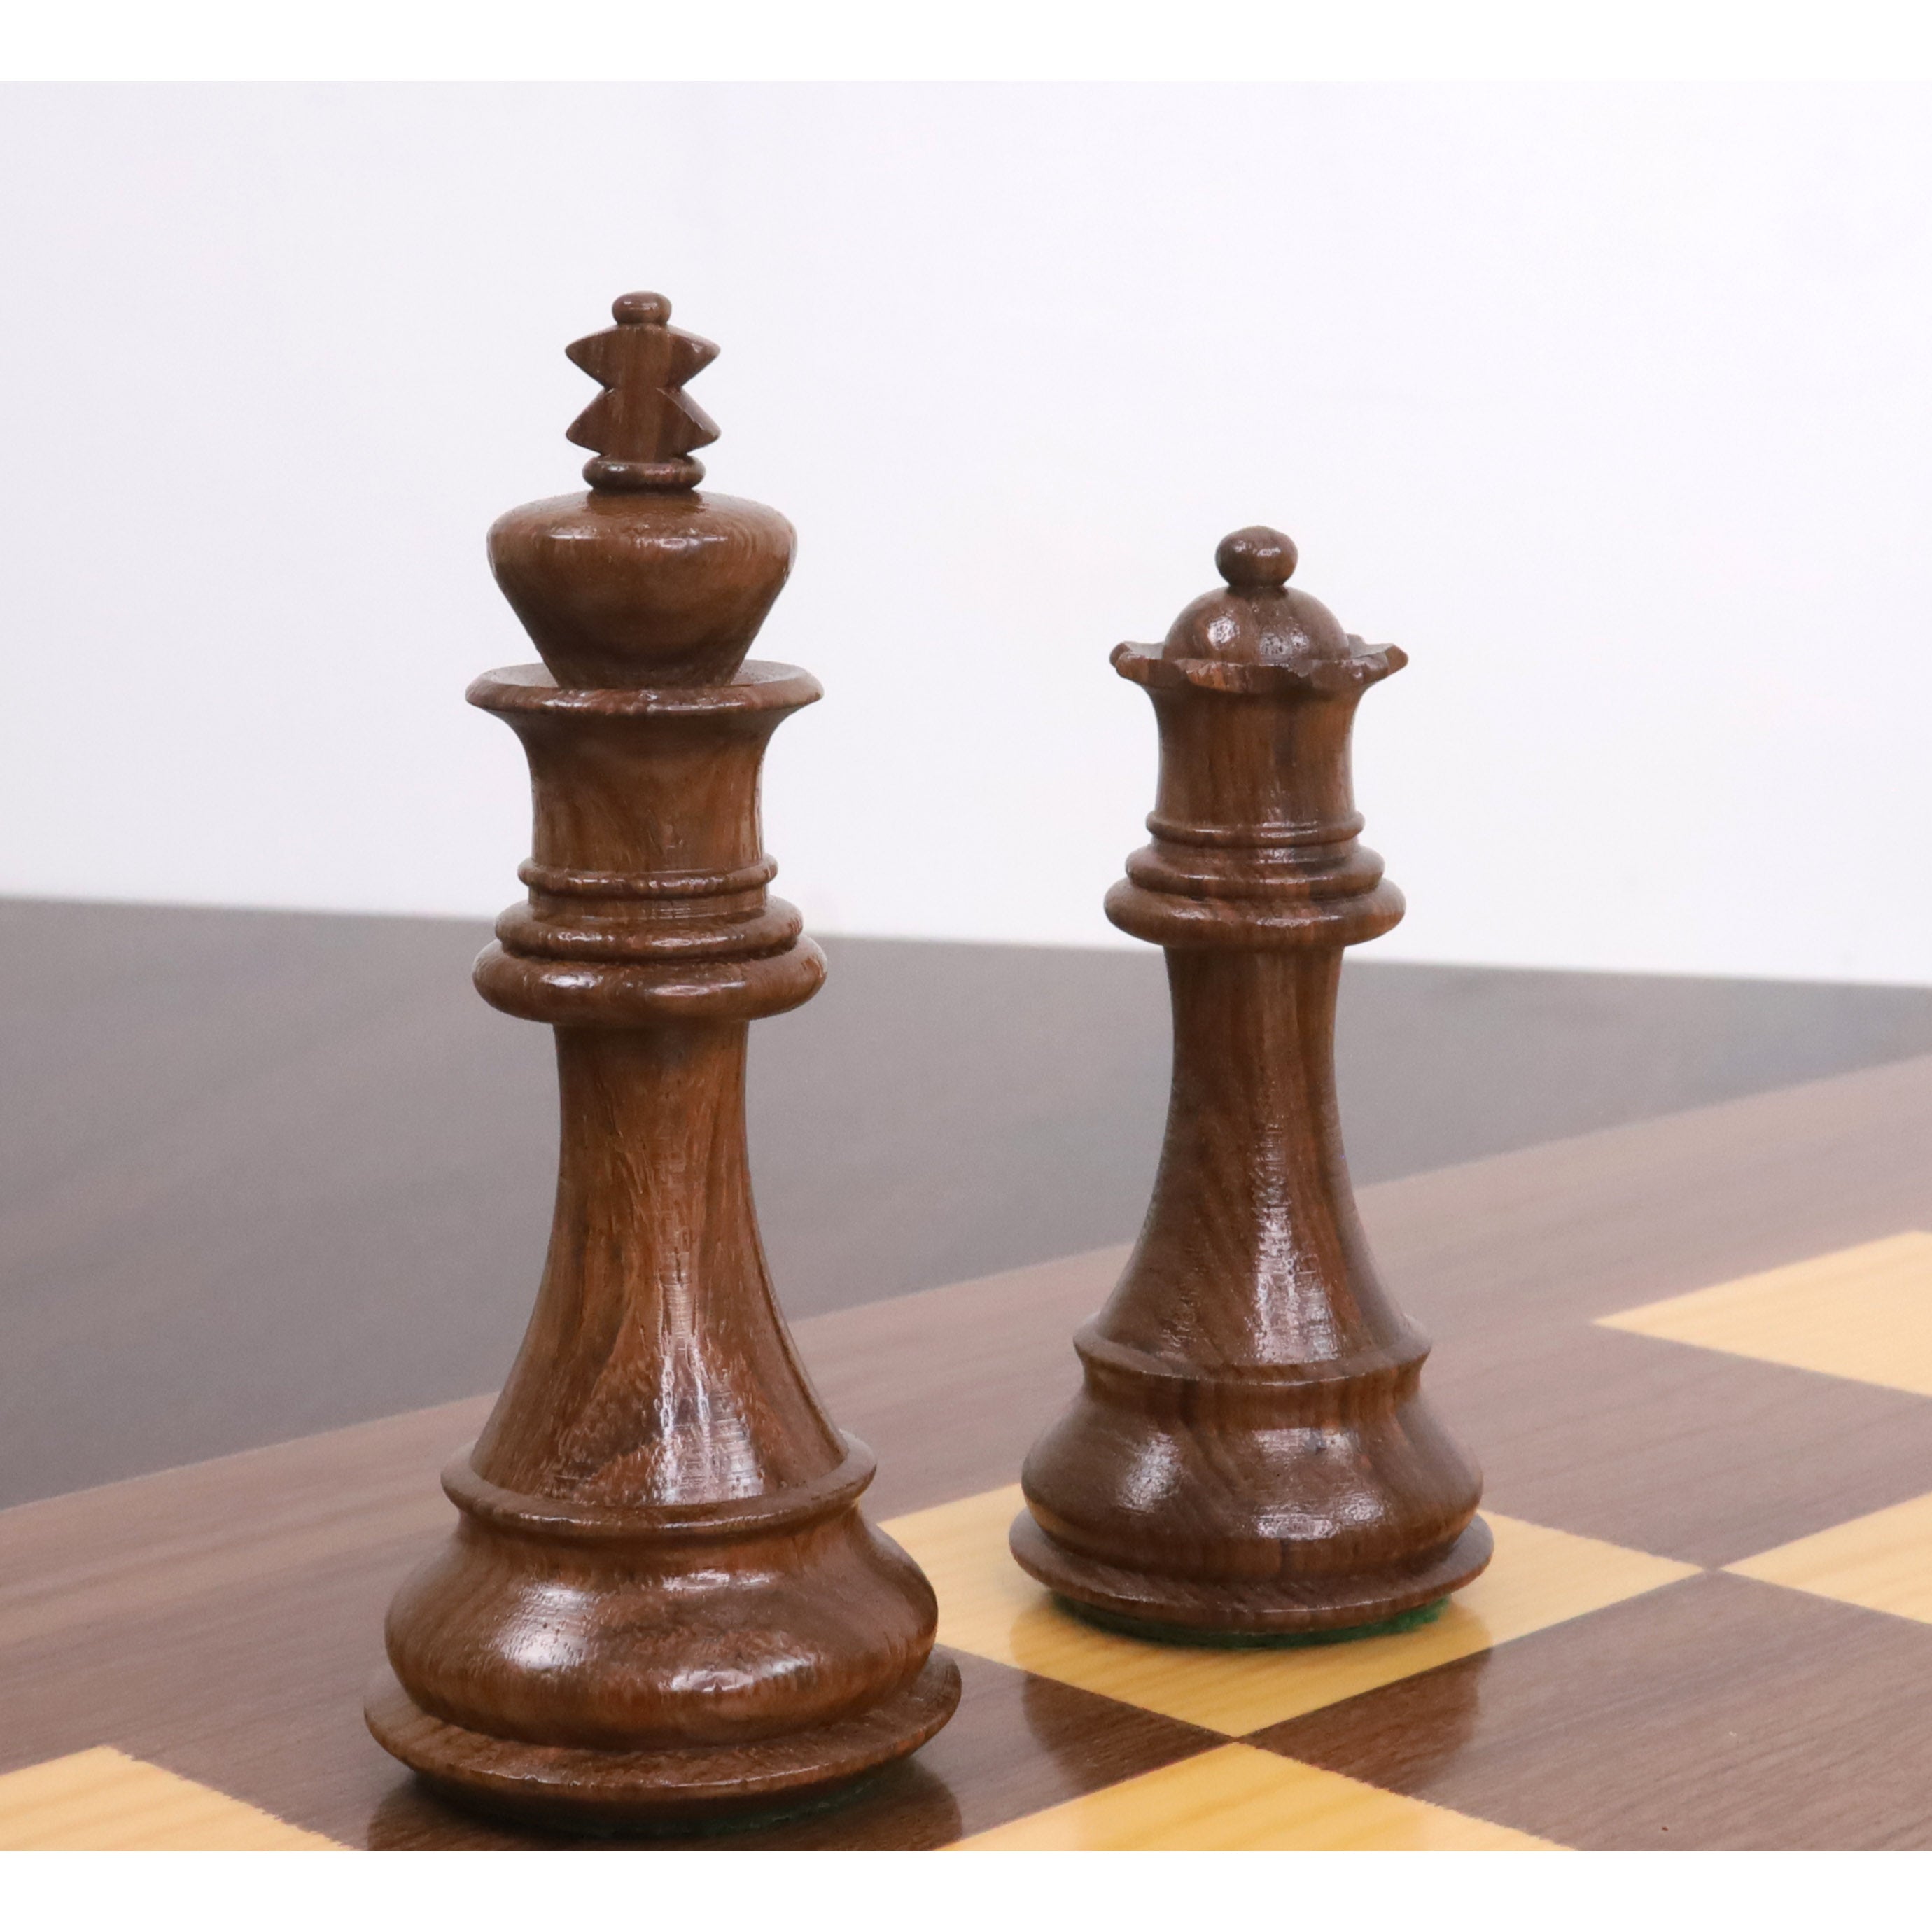 The Bridle Study Analysis Chess Pieces in Sheesham and Boxwood 